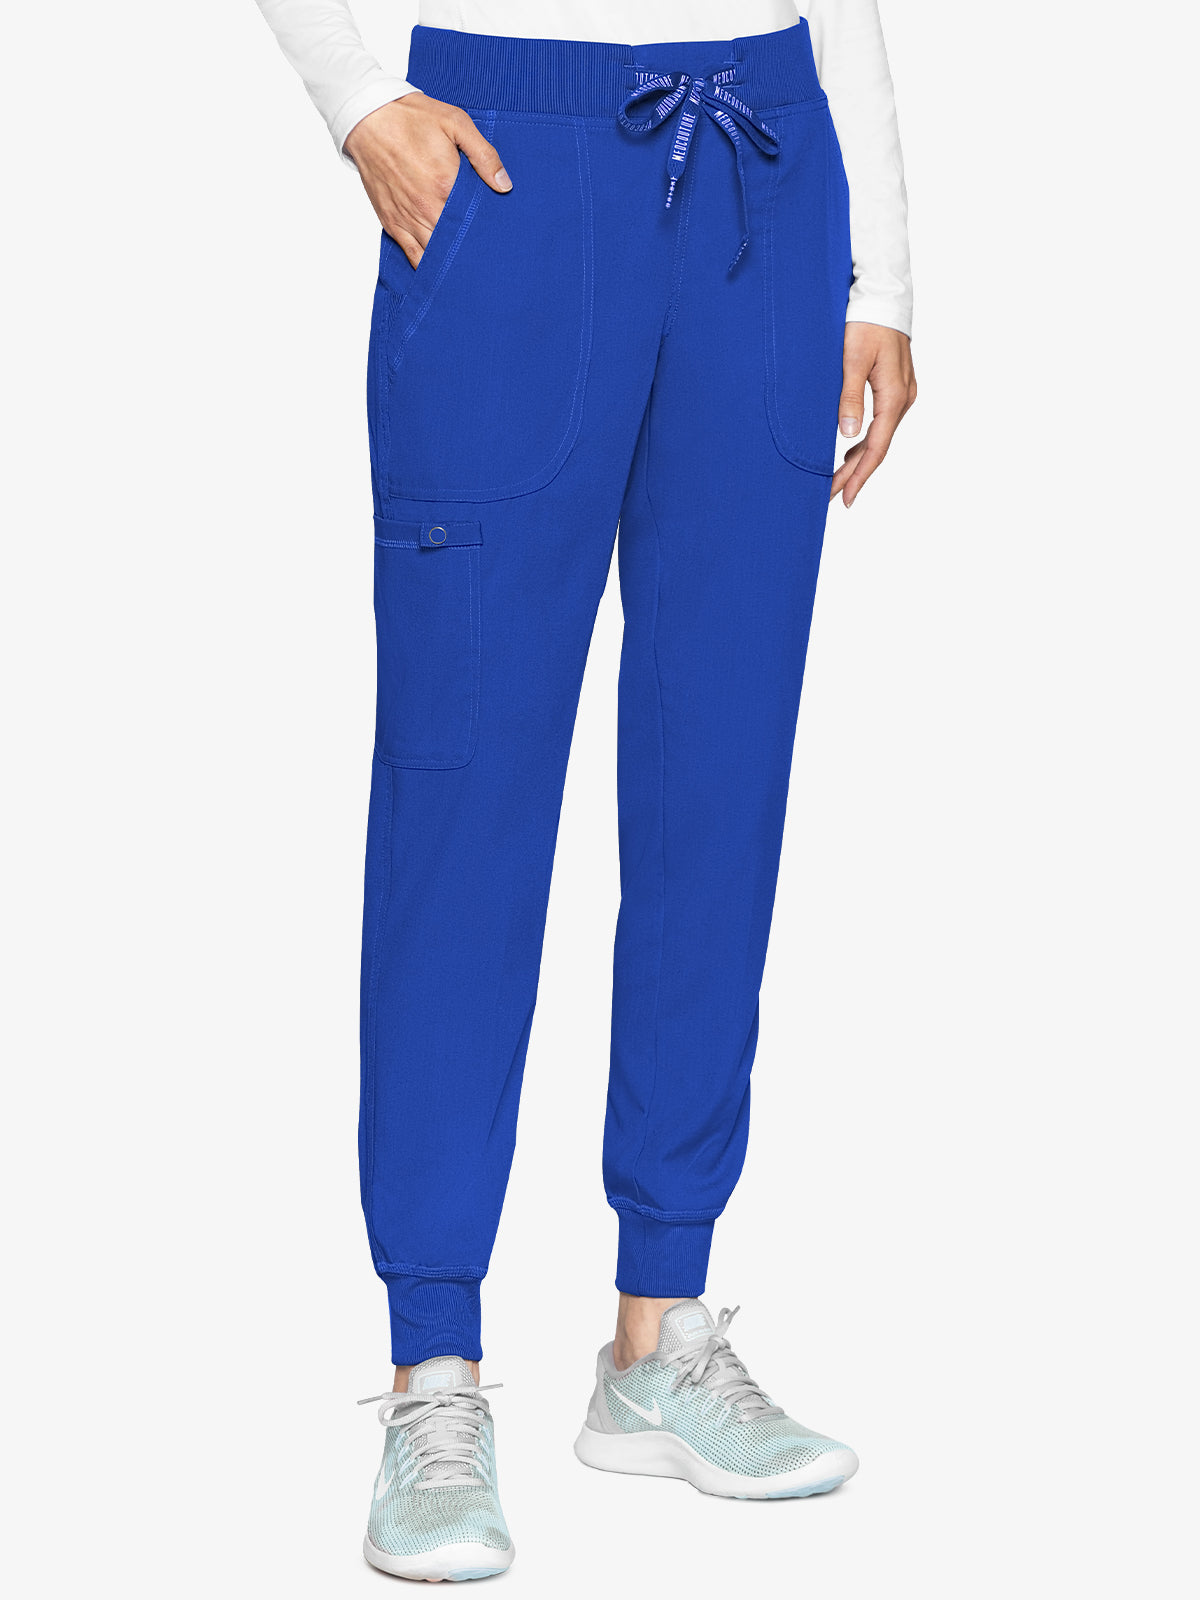 Med Couture Touch 7710 Women's Jogger Yoga Pant Royal